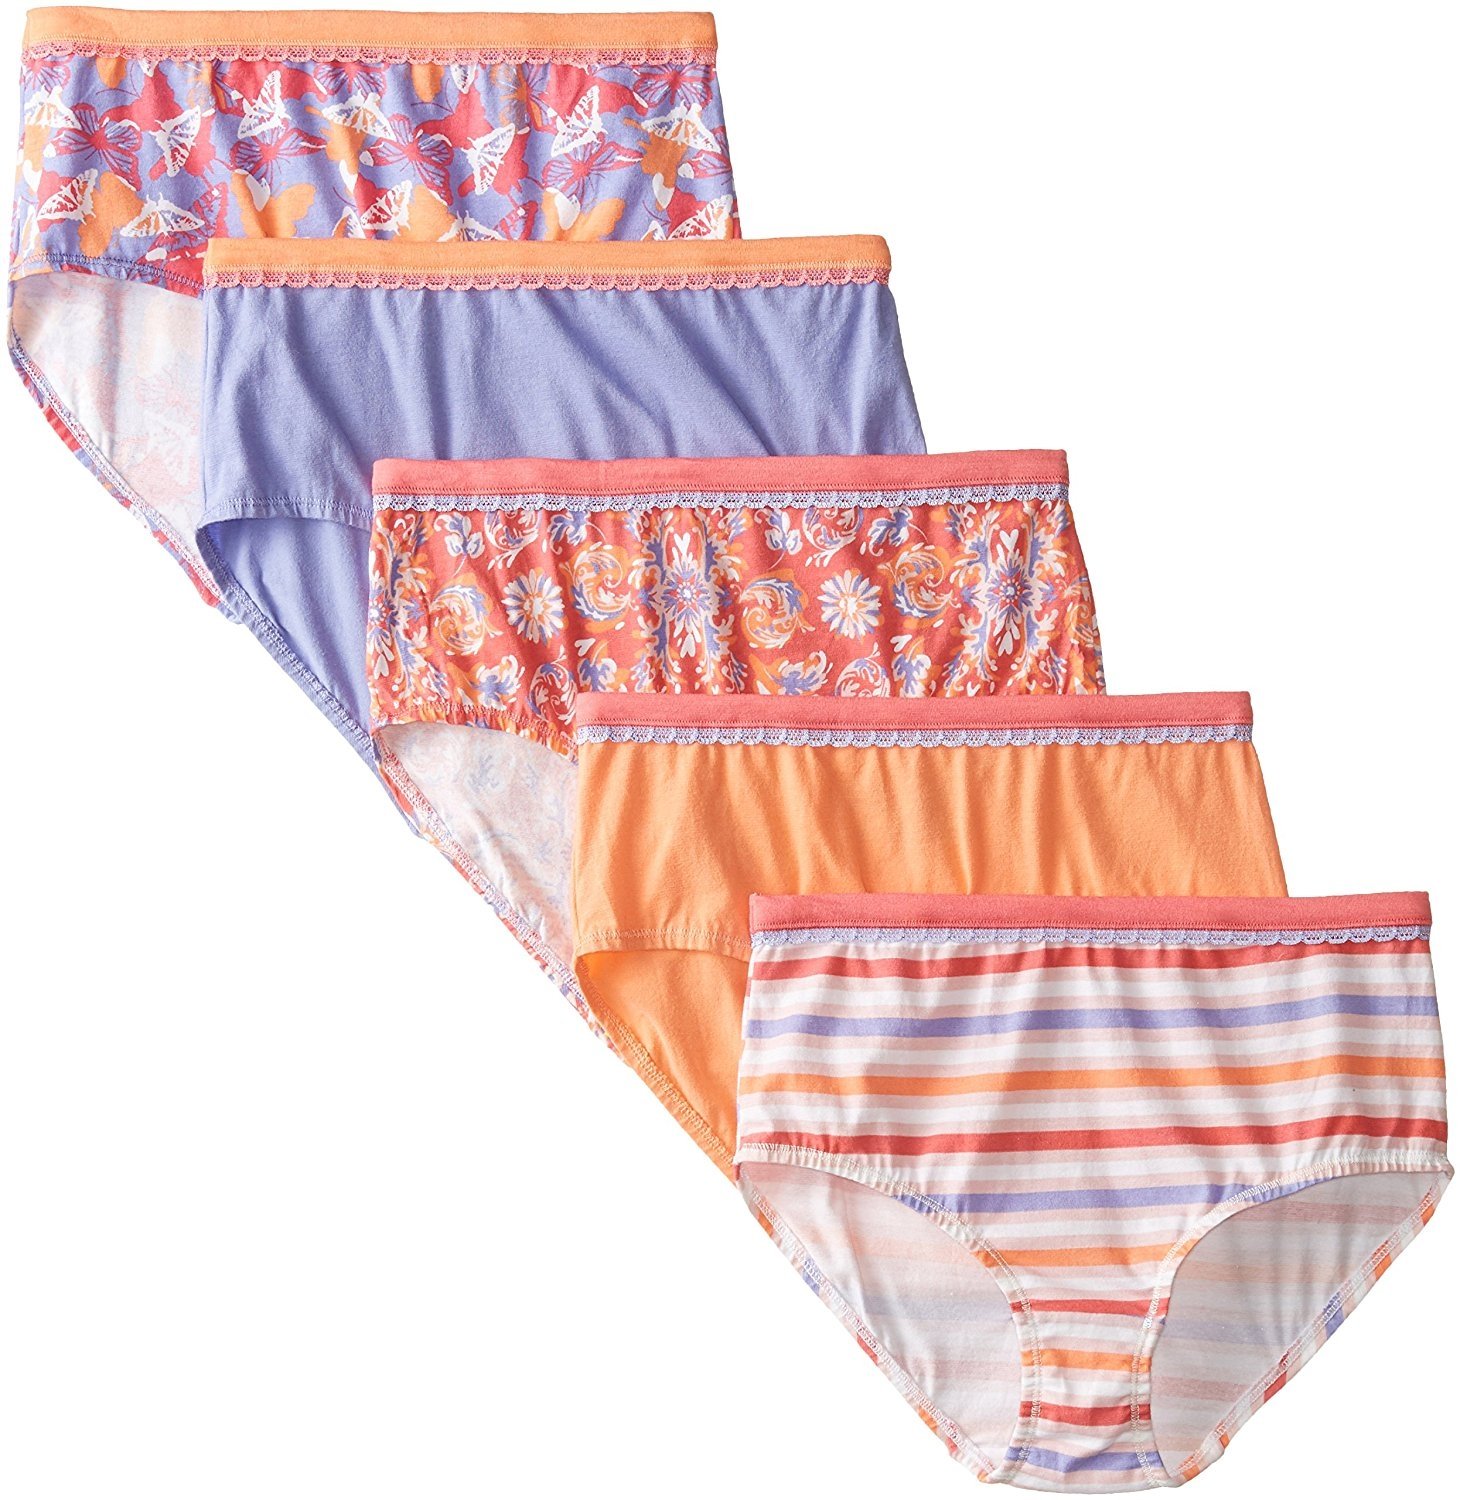 Girls' Cotton Stretch Brief Panties, 5 Pack Assortment May Vary - image 2 of 3